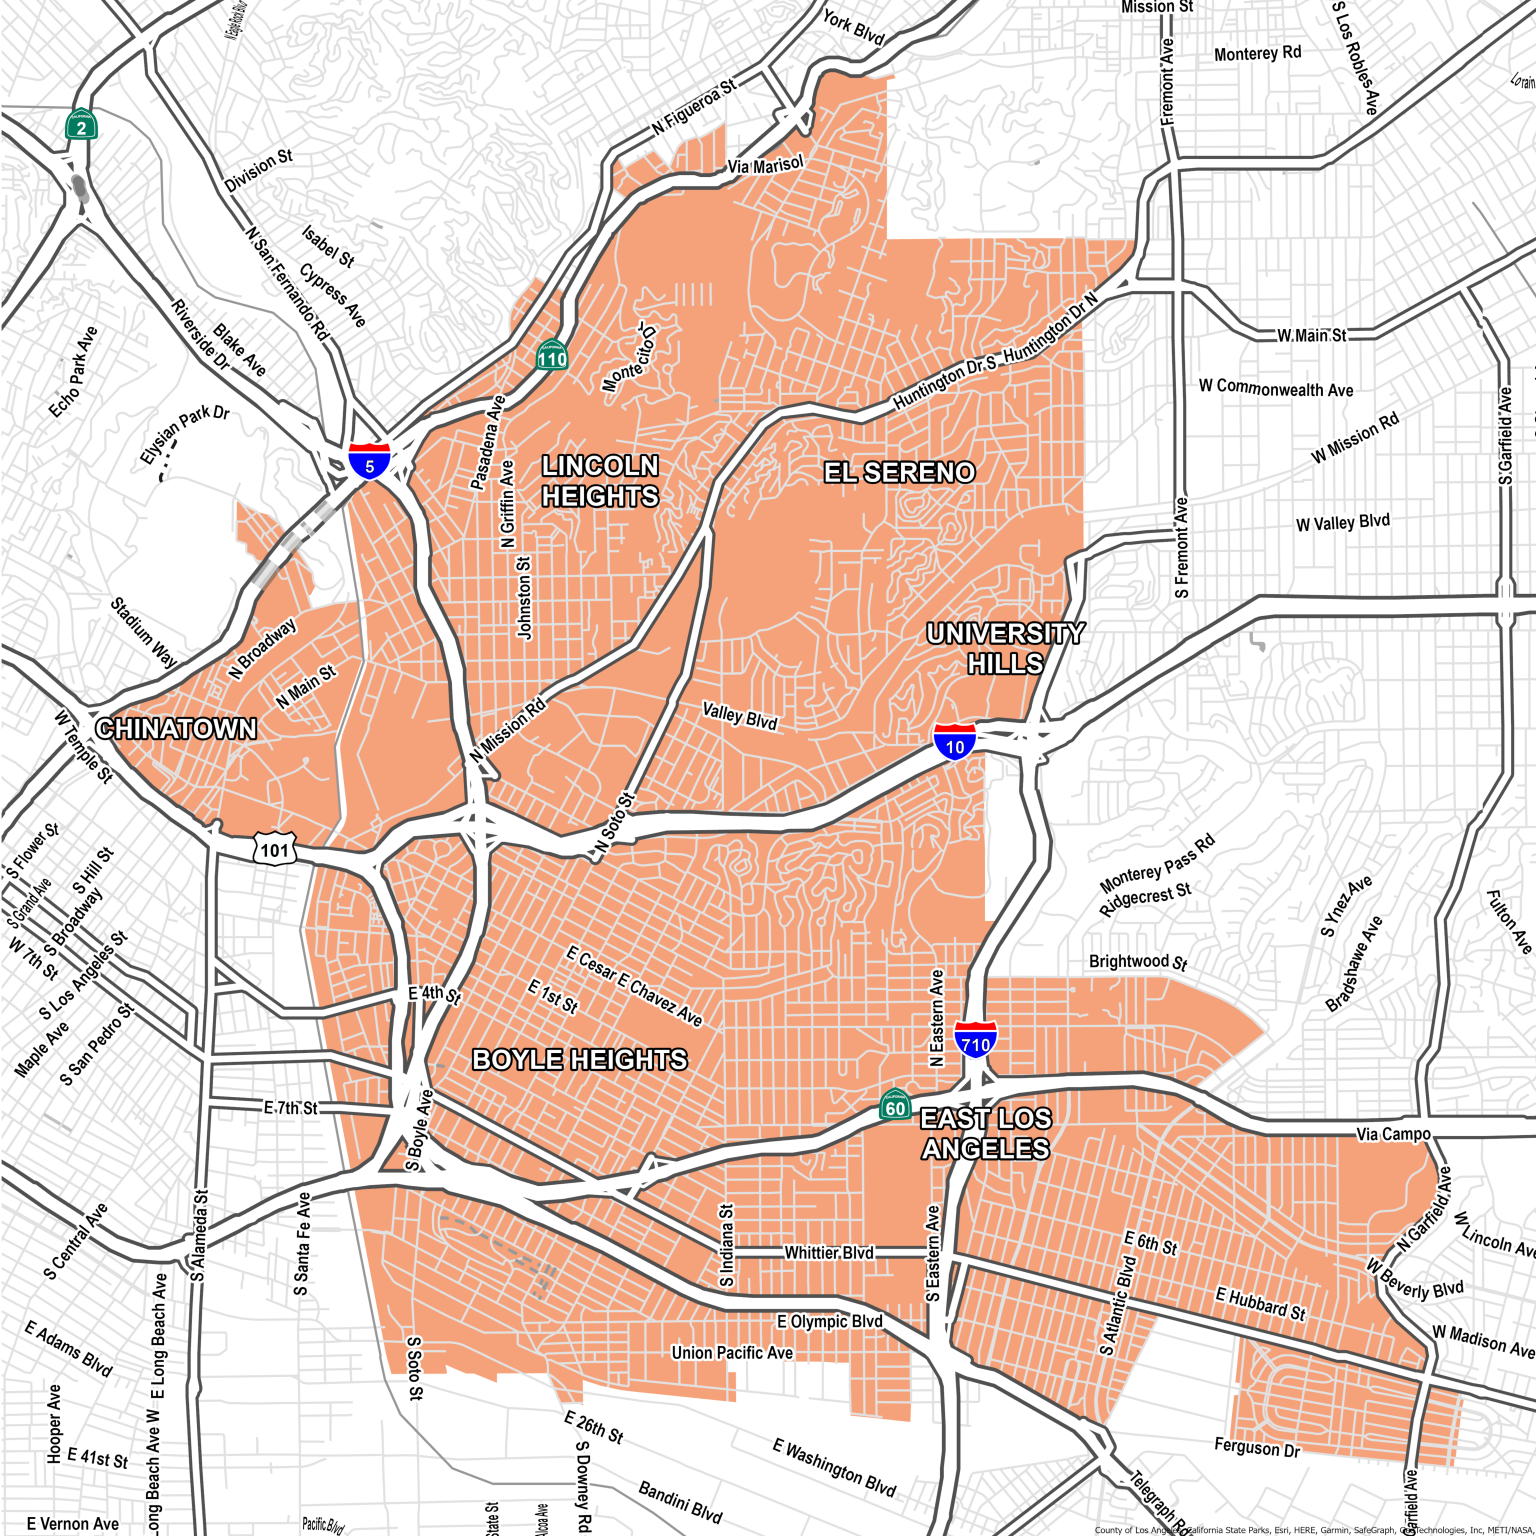 Map of East LA Boyle Heights

Link to interactive map:
https://www.deletethedivide.org/east-la-boyle-heights-project-area/